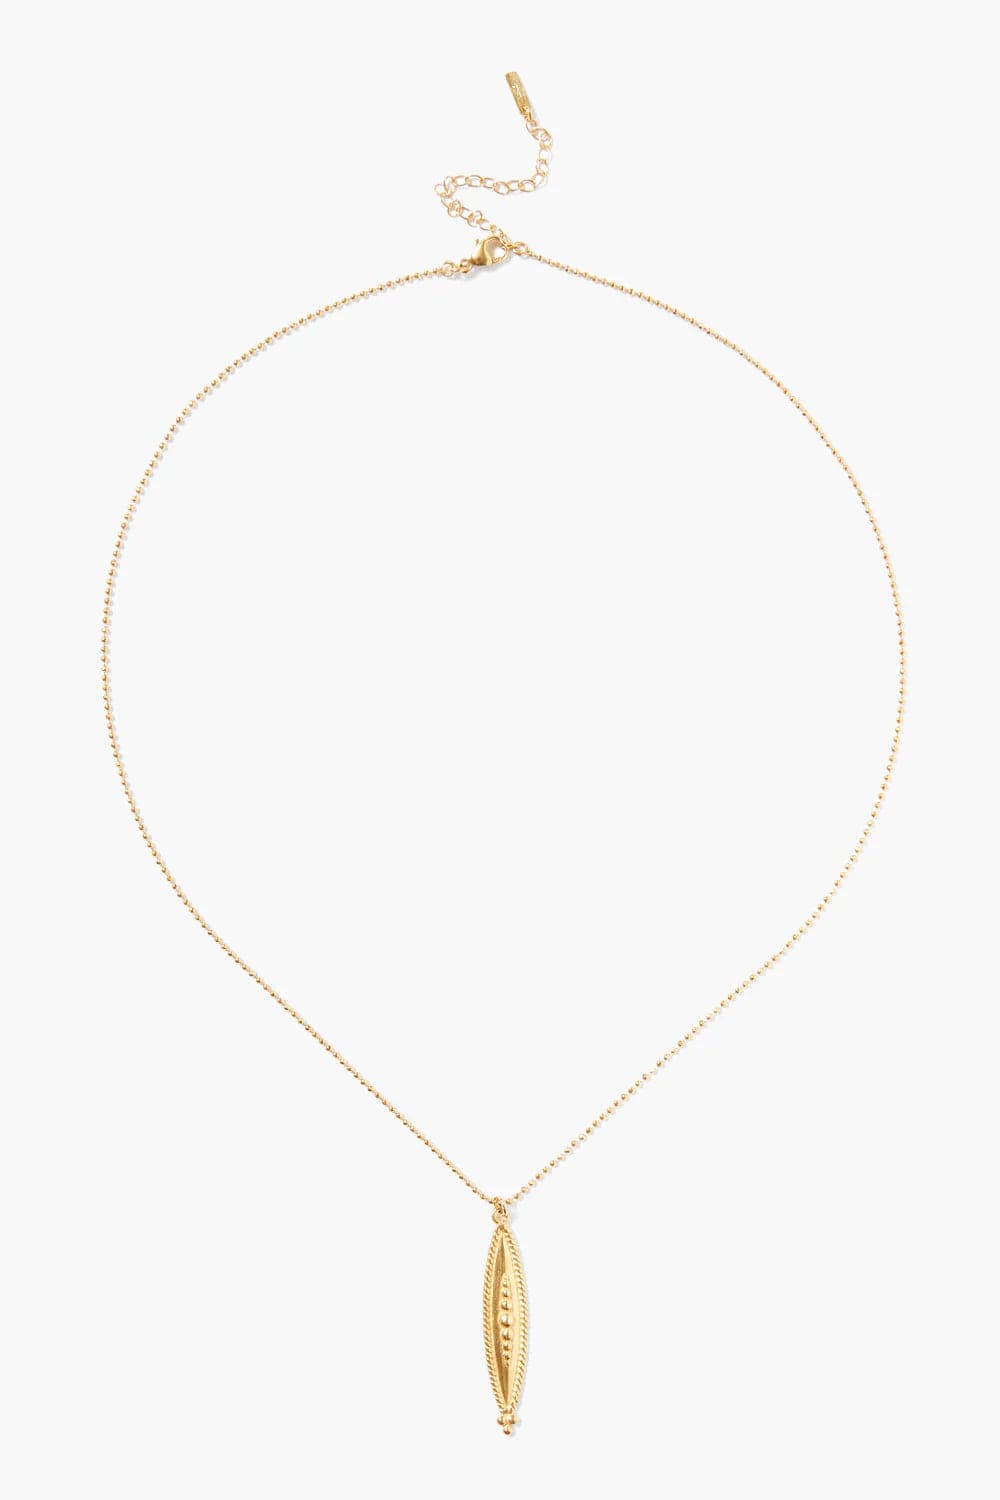 NKL-GPL Odessa Necklace Yellow Gold